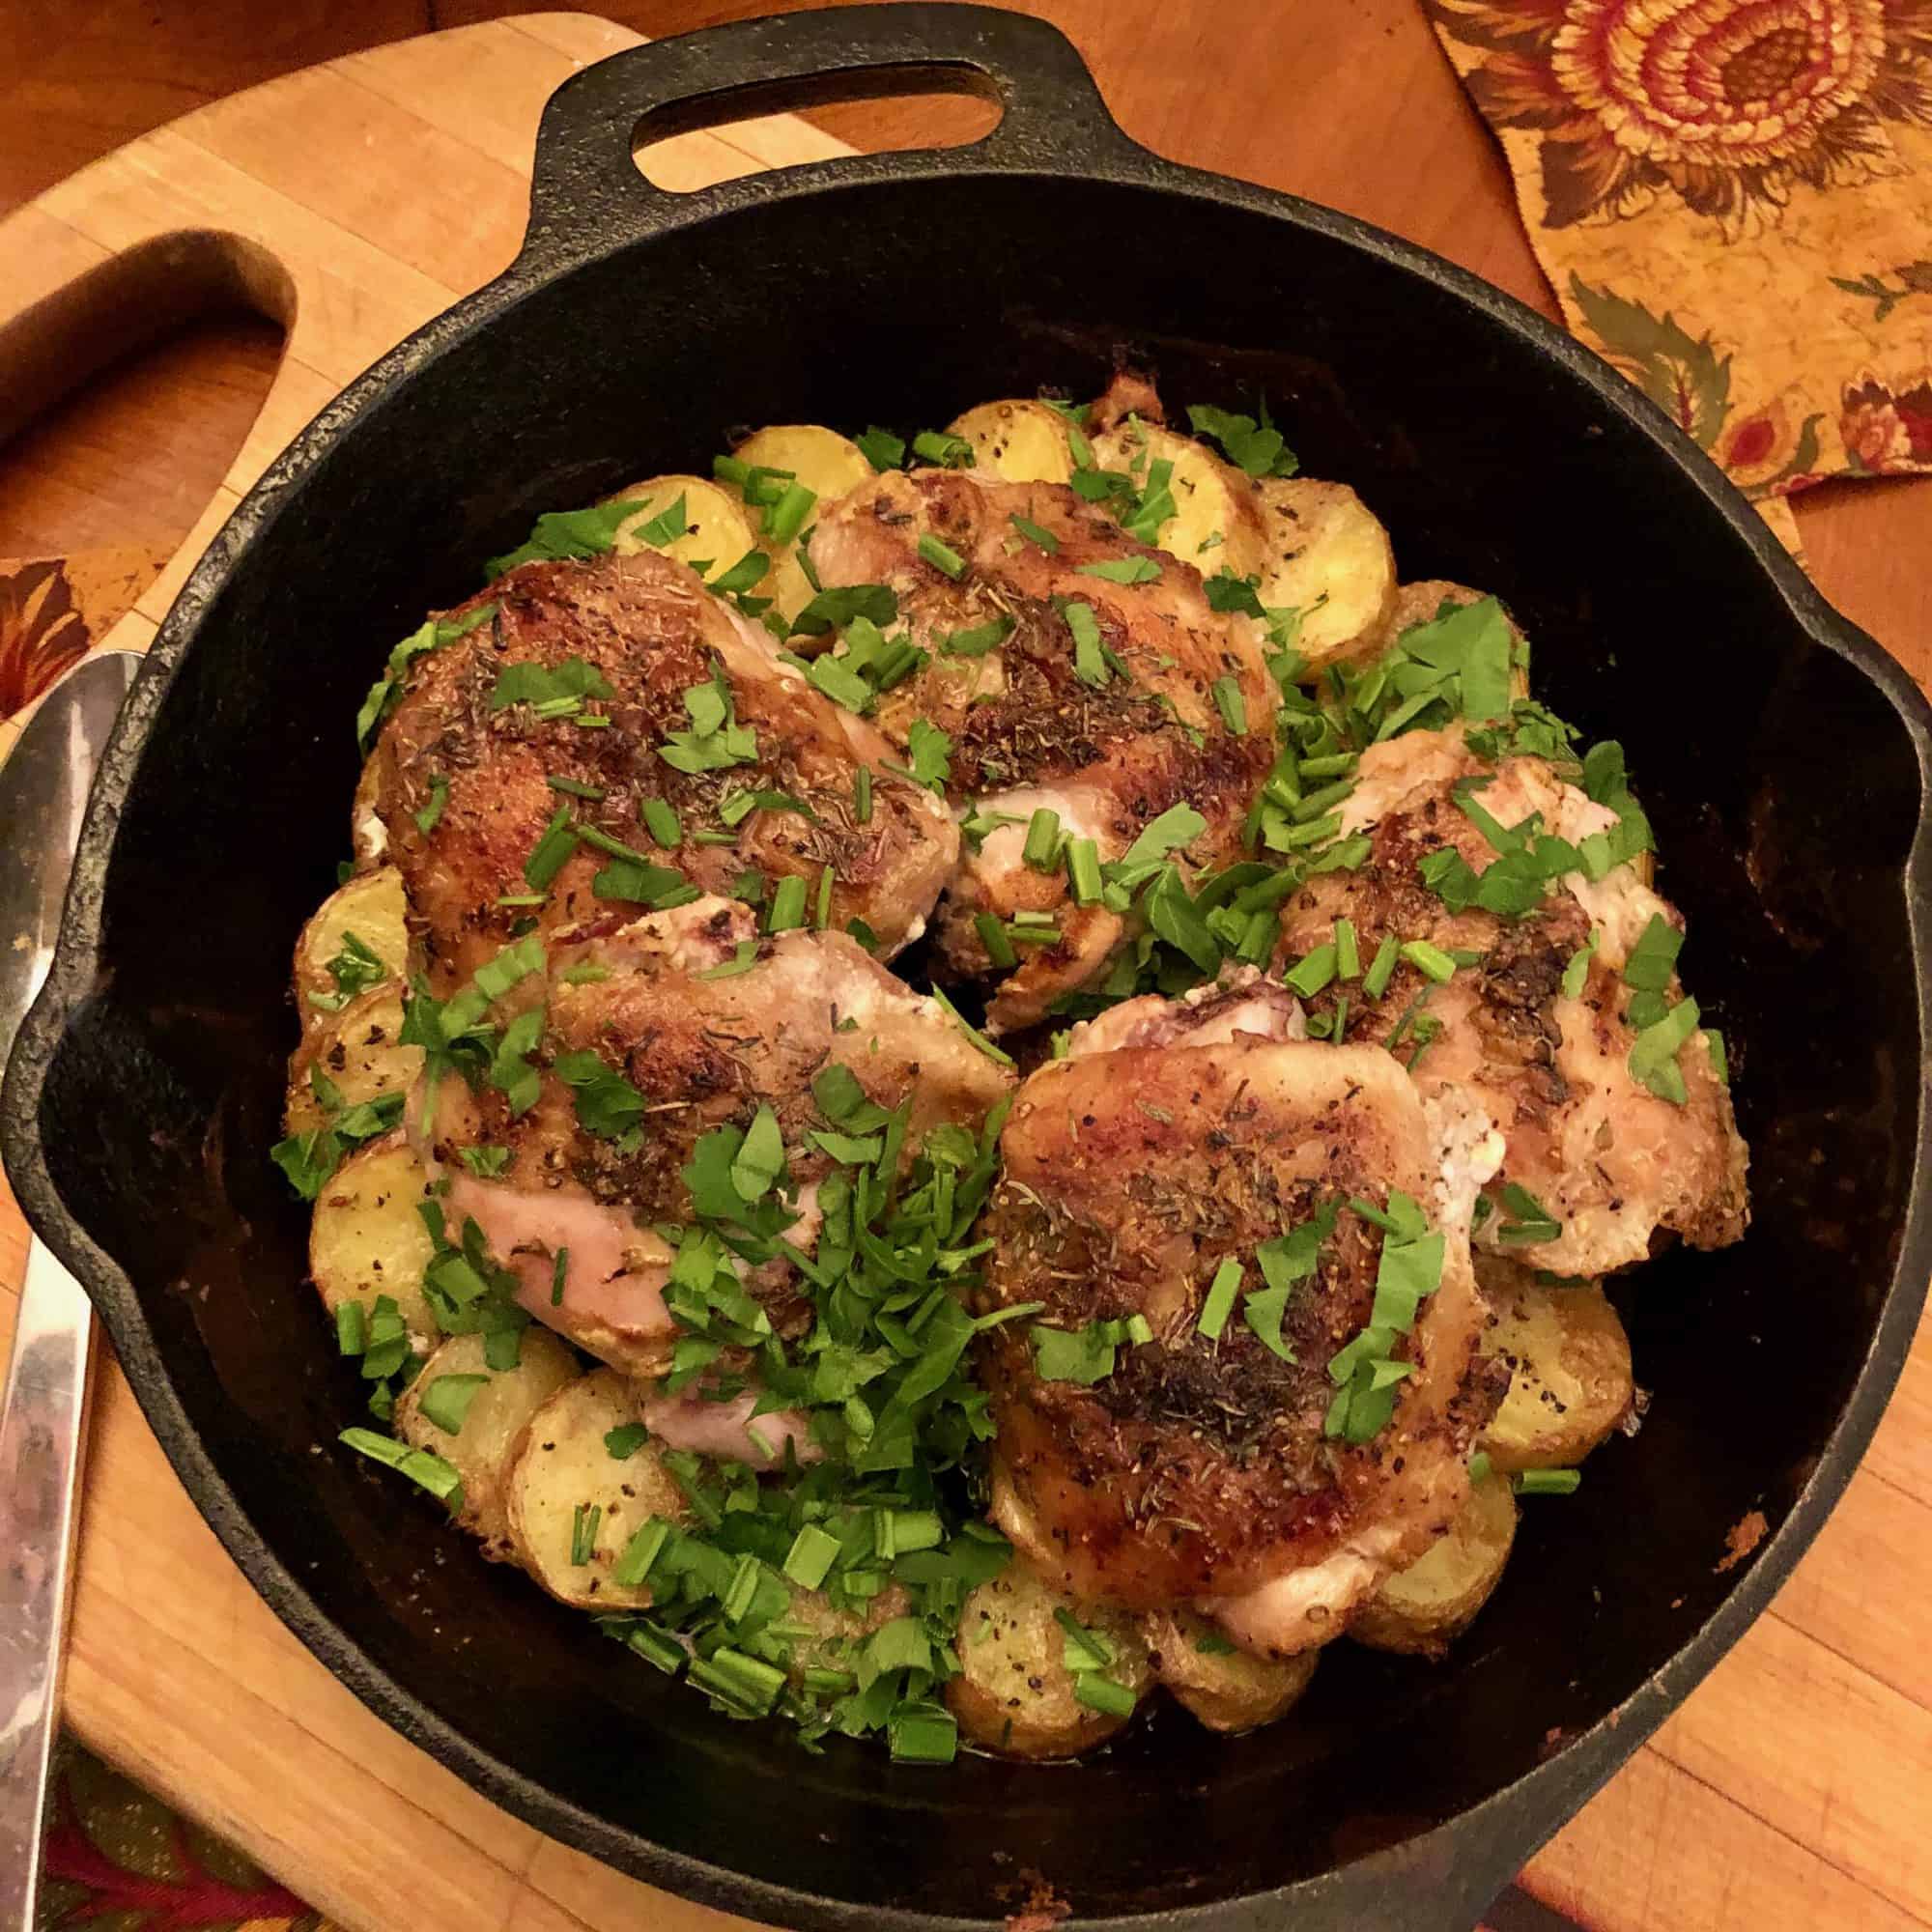 Ina Garten’s Skillet-Roasted Chicken and Potatoes